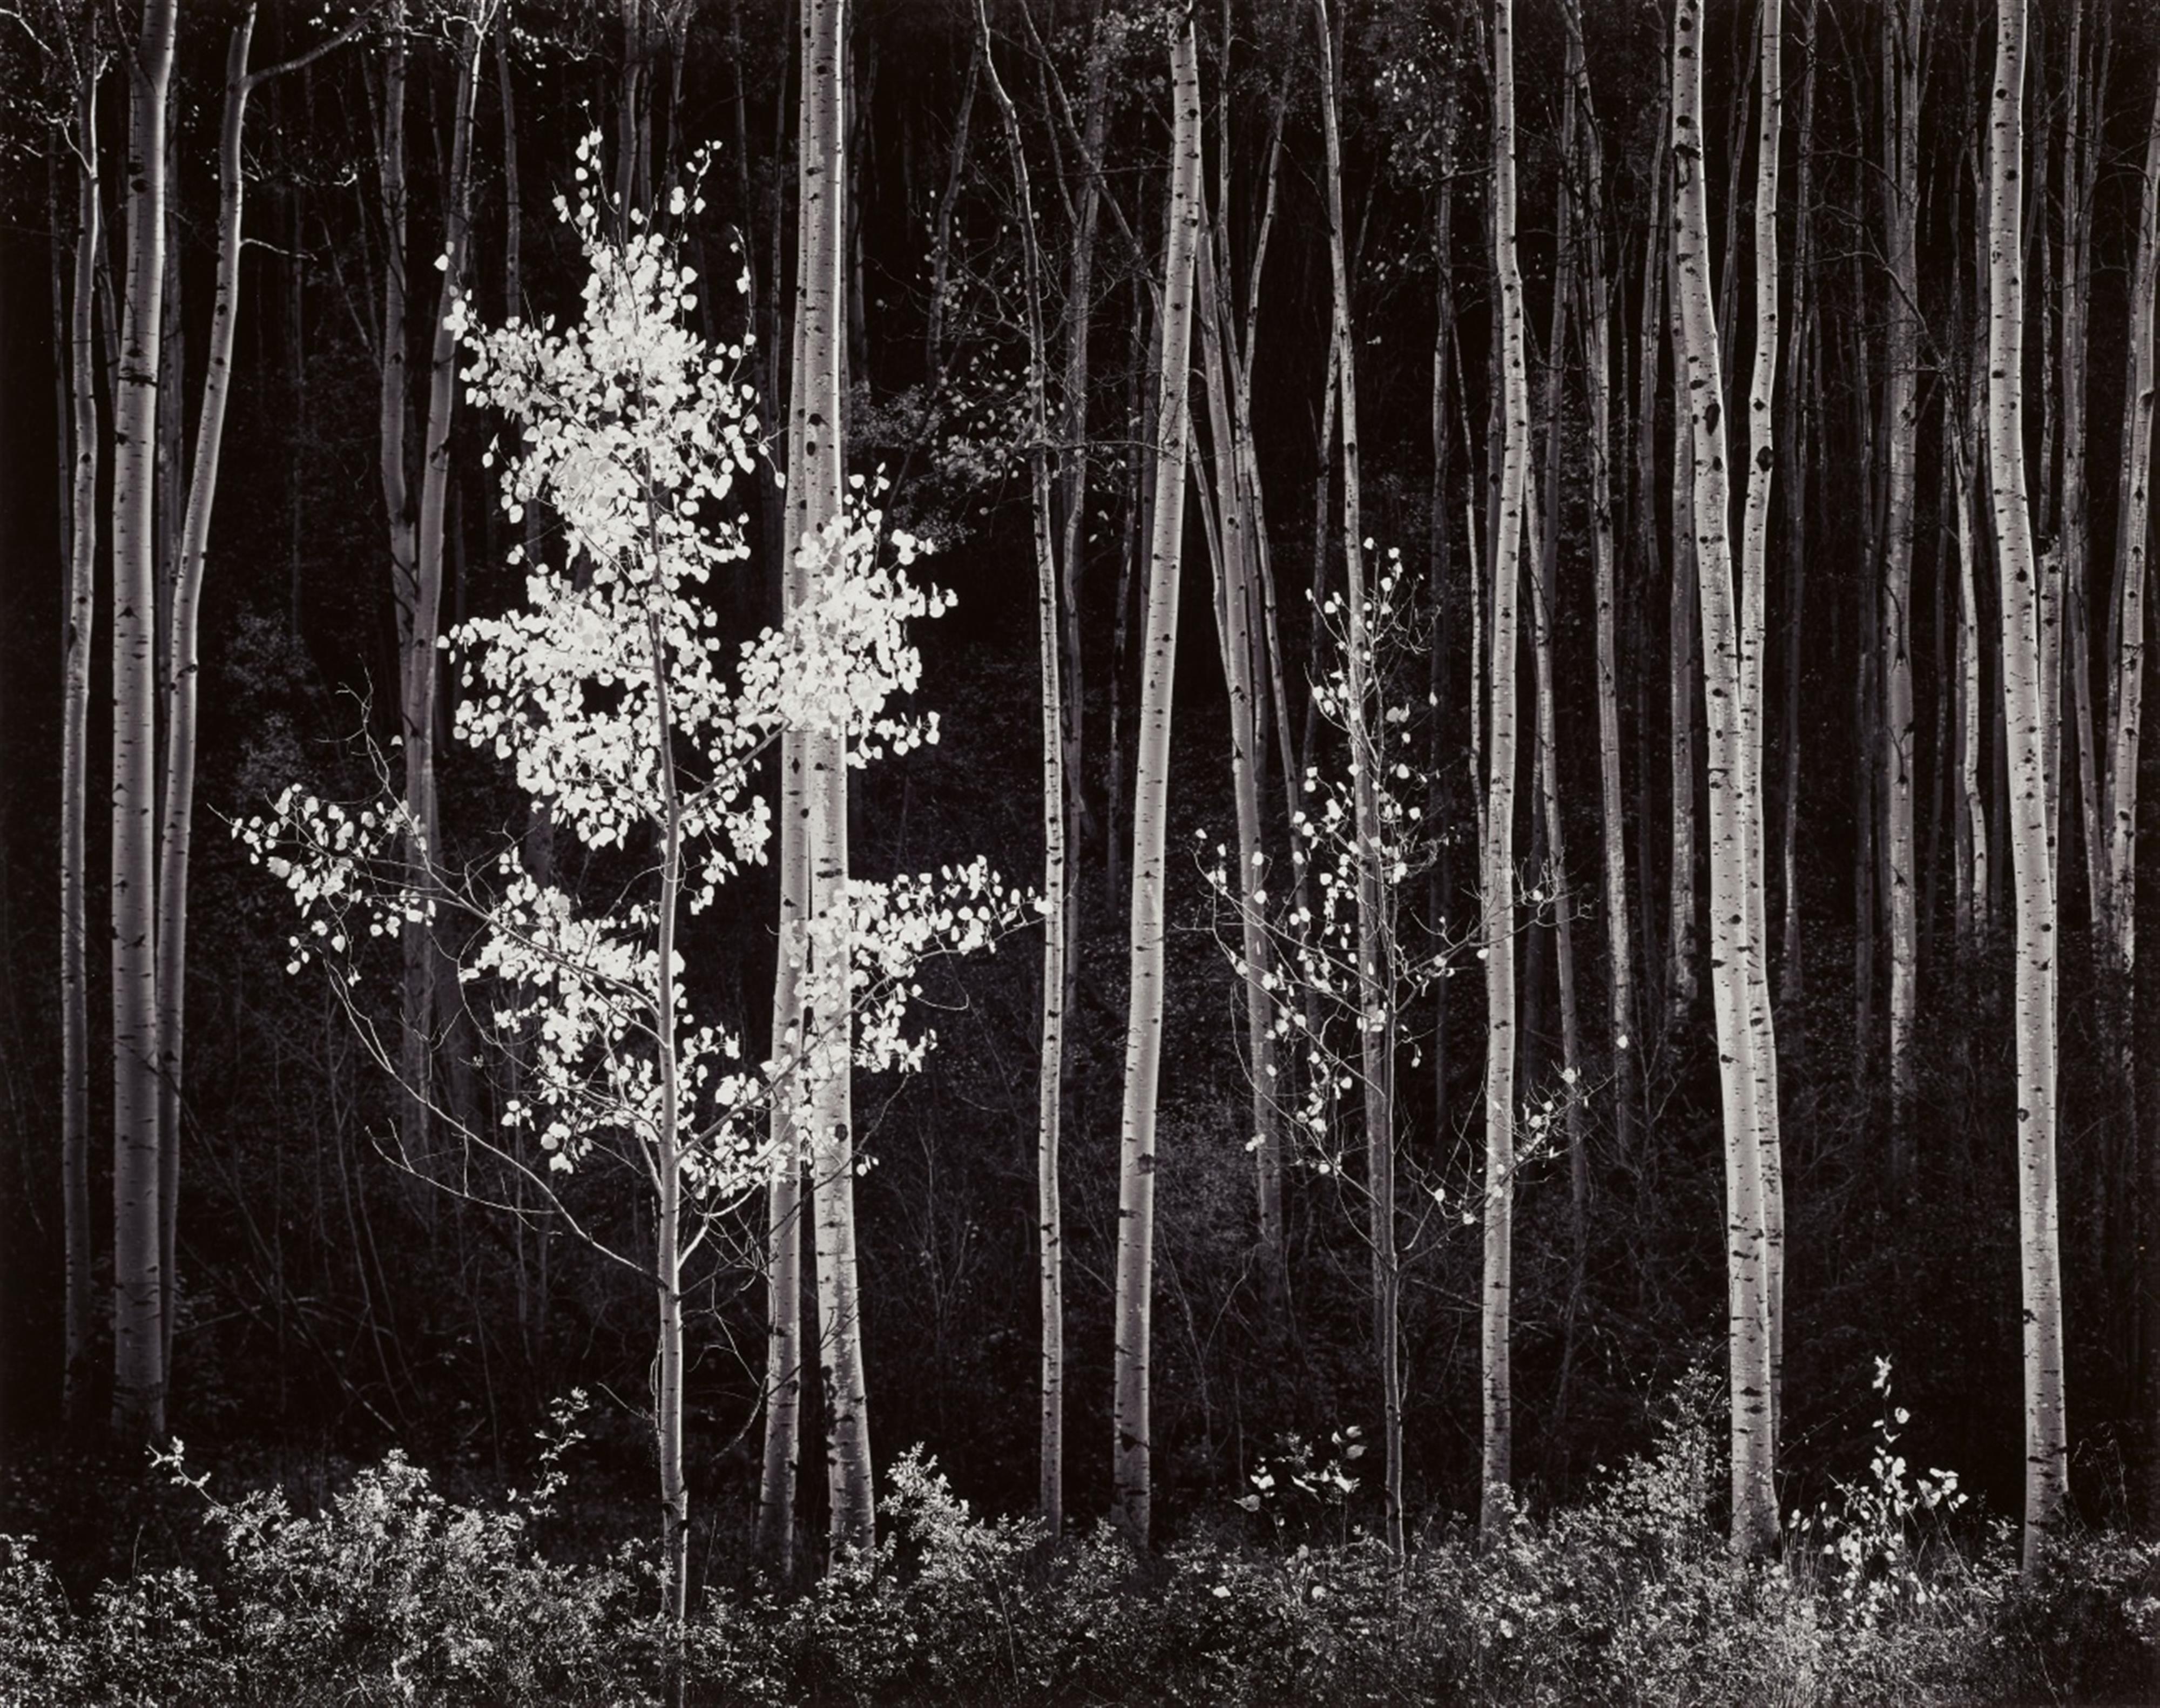 Ansel Adams - Aspens, Northern New Mexico - image-1